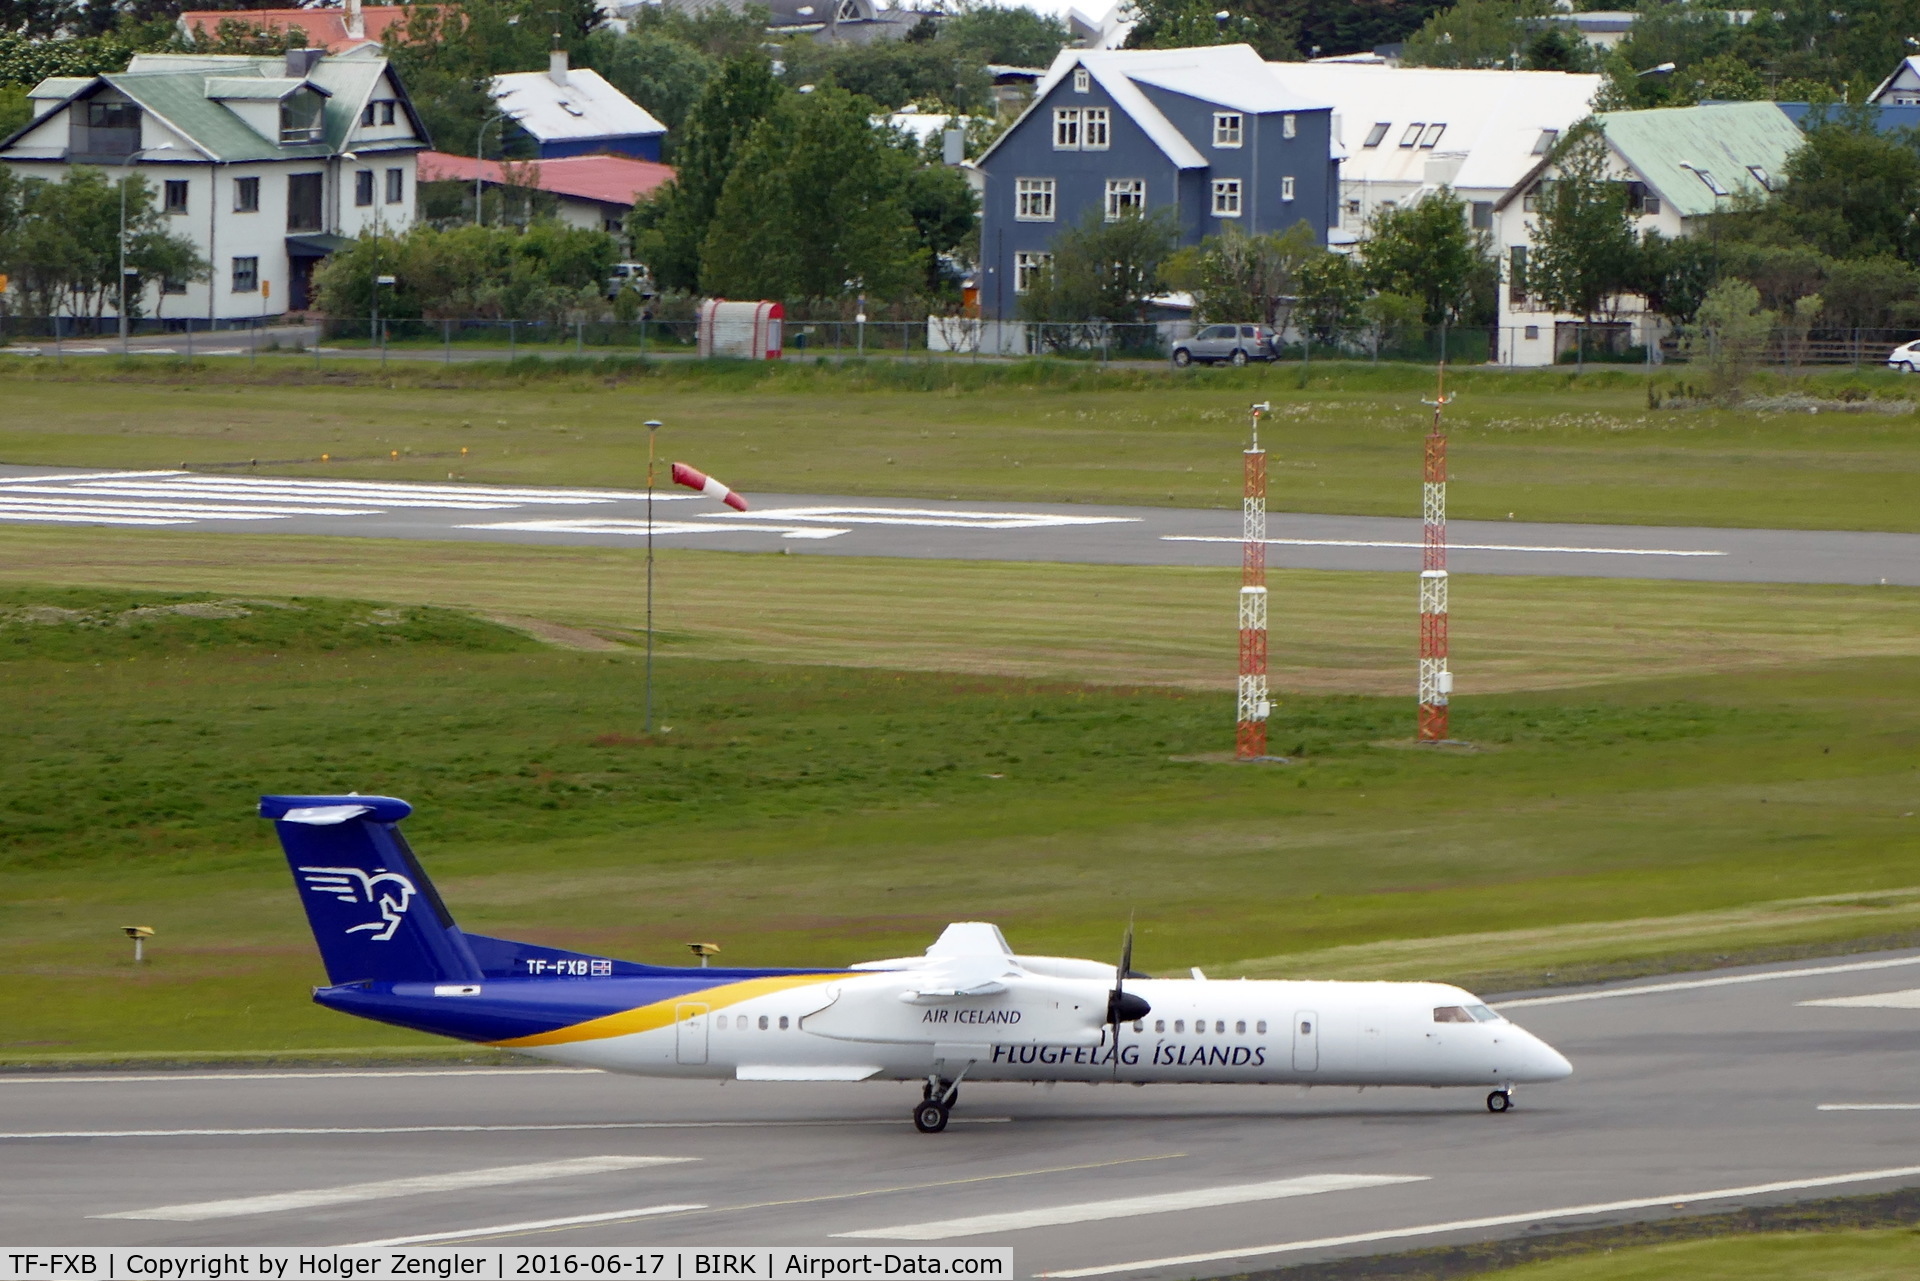 TF-FXB, 2001 De Havilland Canada DHC-8-402Q Dash 8 C/N 4038, The chairman of Icelandic Planespotter Association (IPA) is reported to live in that beautiful blue house next to airport fence...